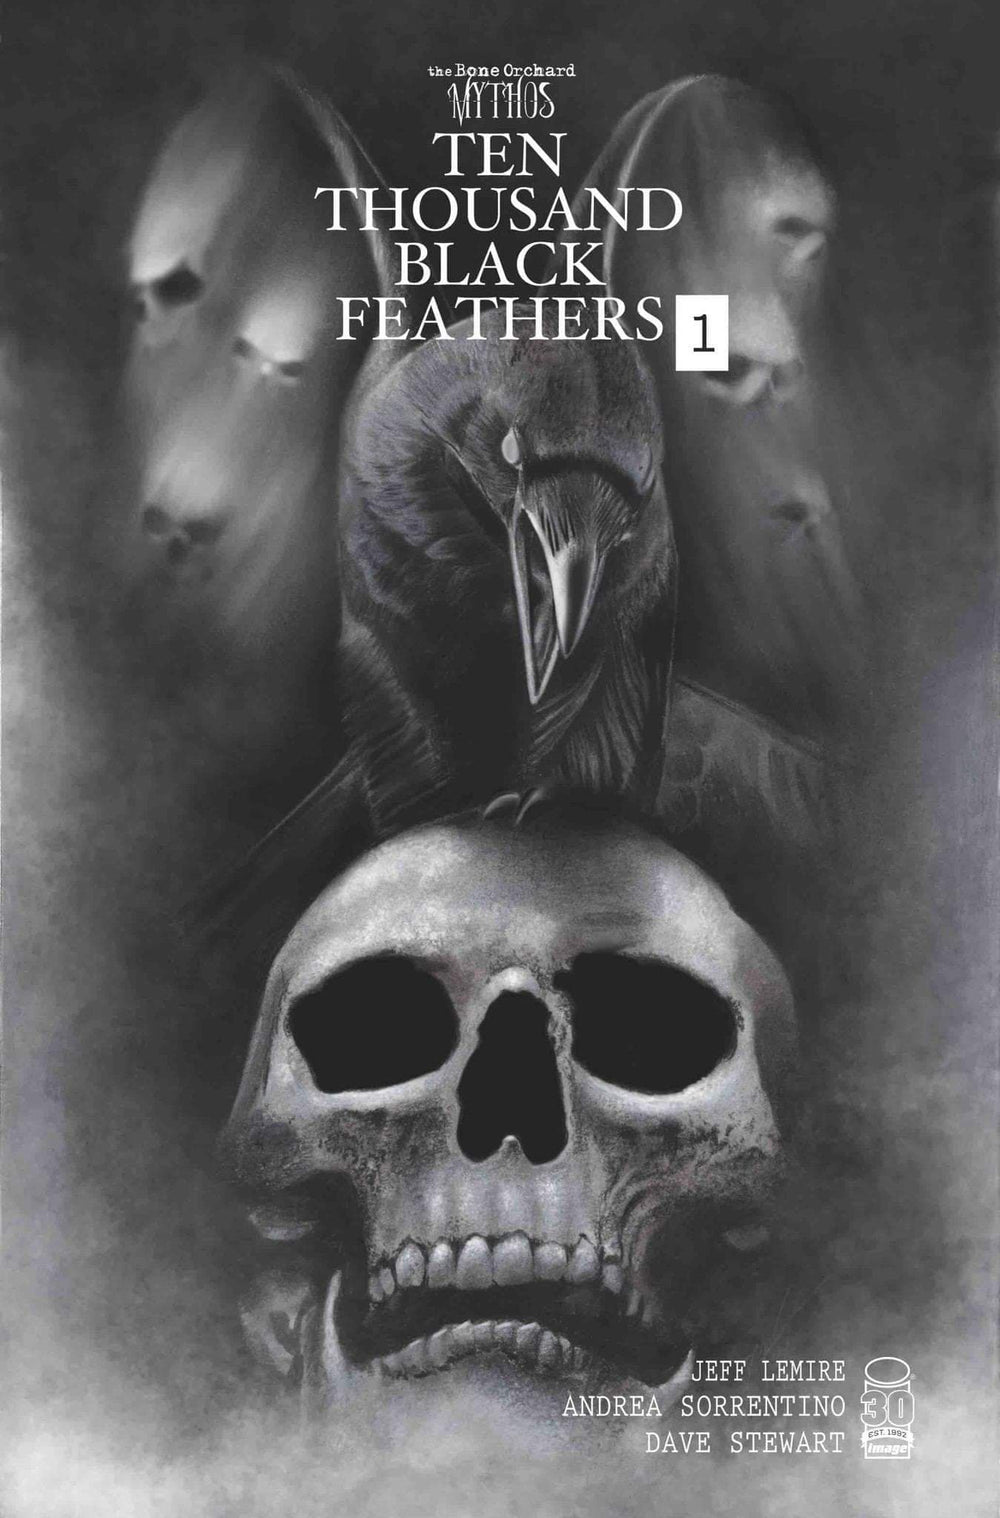 TEN THOUSAND BLACK FEATHERS #1 by David Sanchez! Ltd to ONLY 500 with COA!